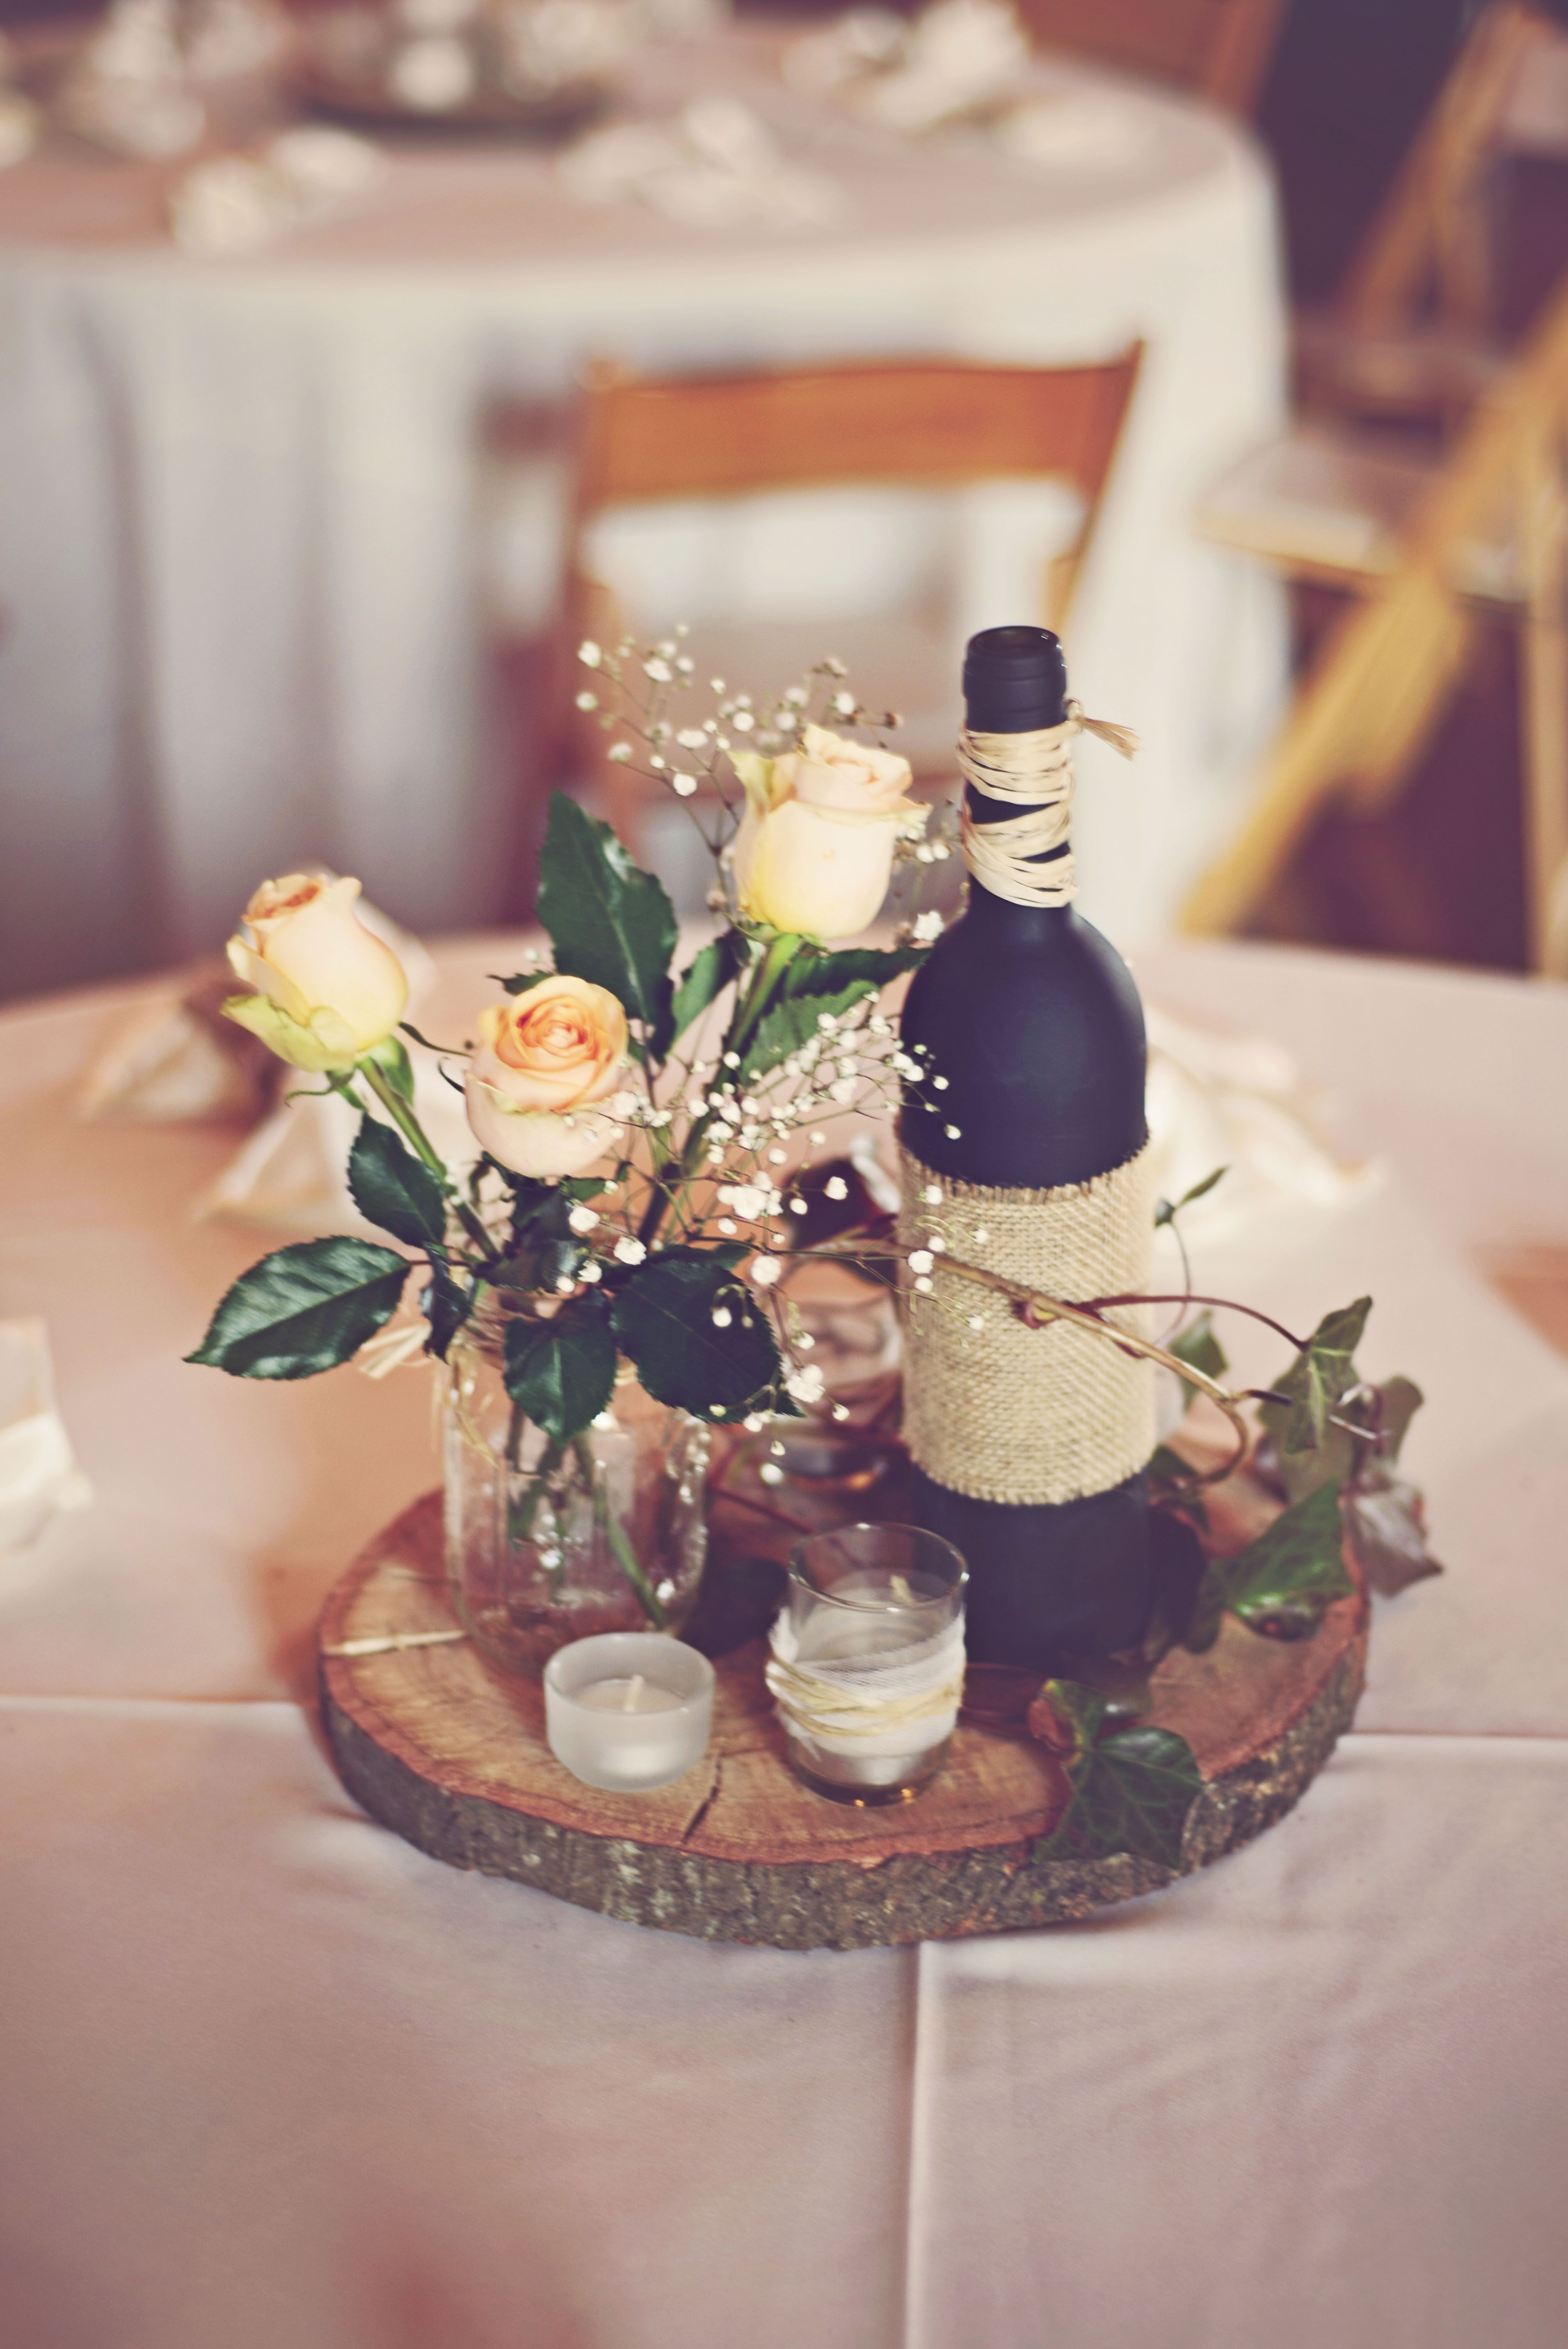 DIY Rustic Centerpiece with Rose Buds and Wood Round